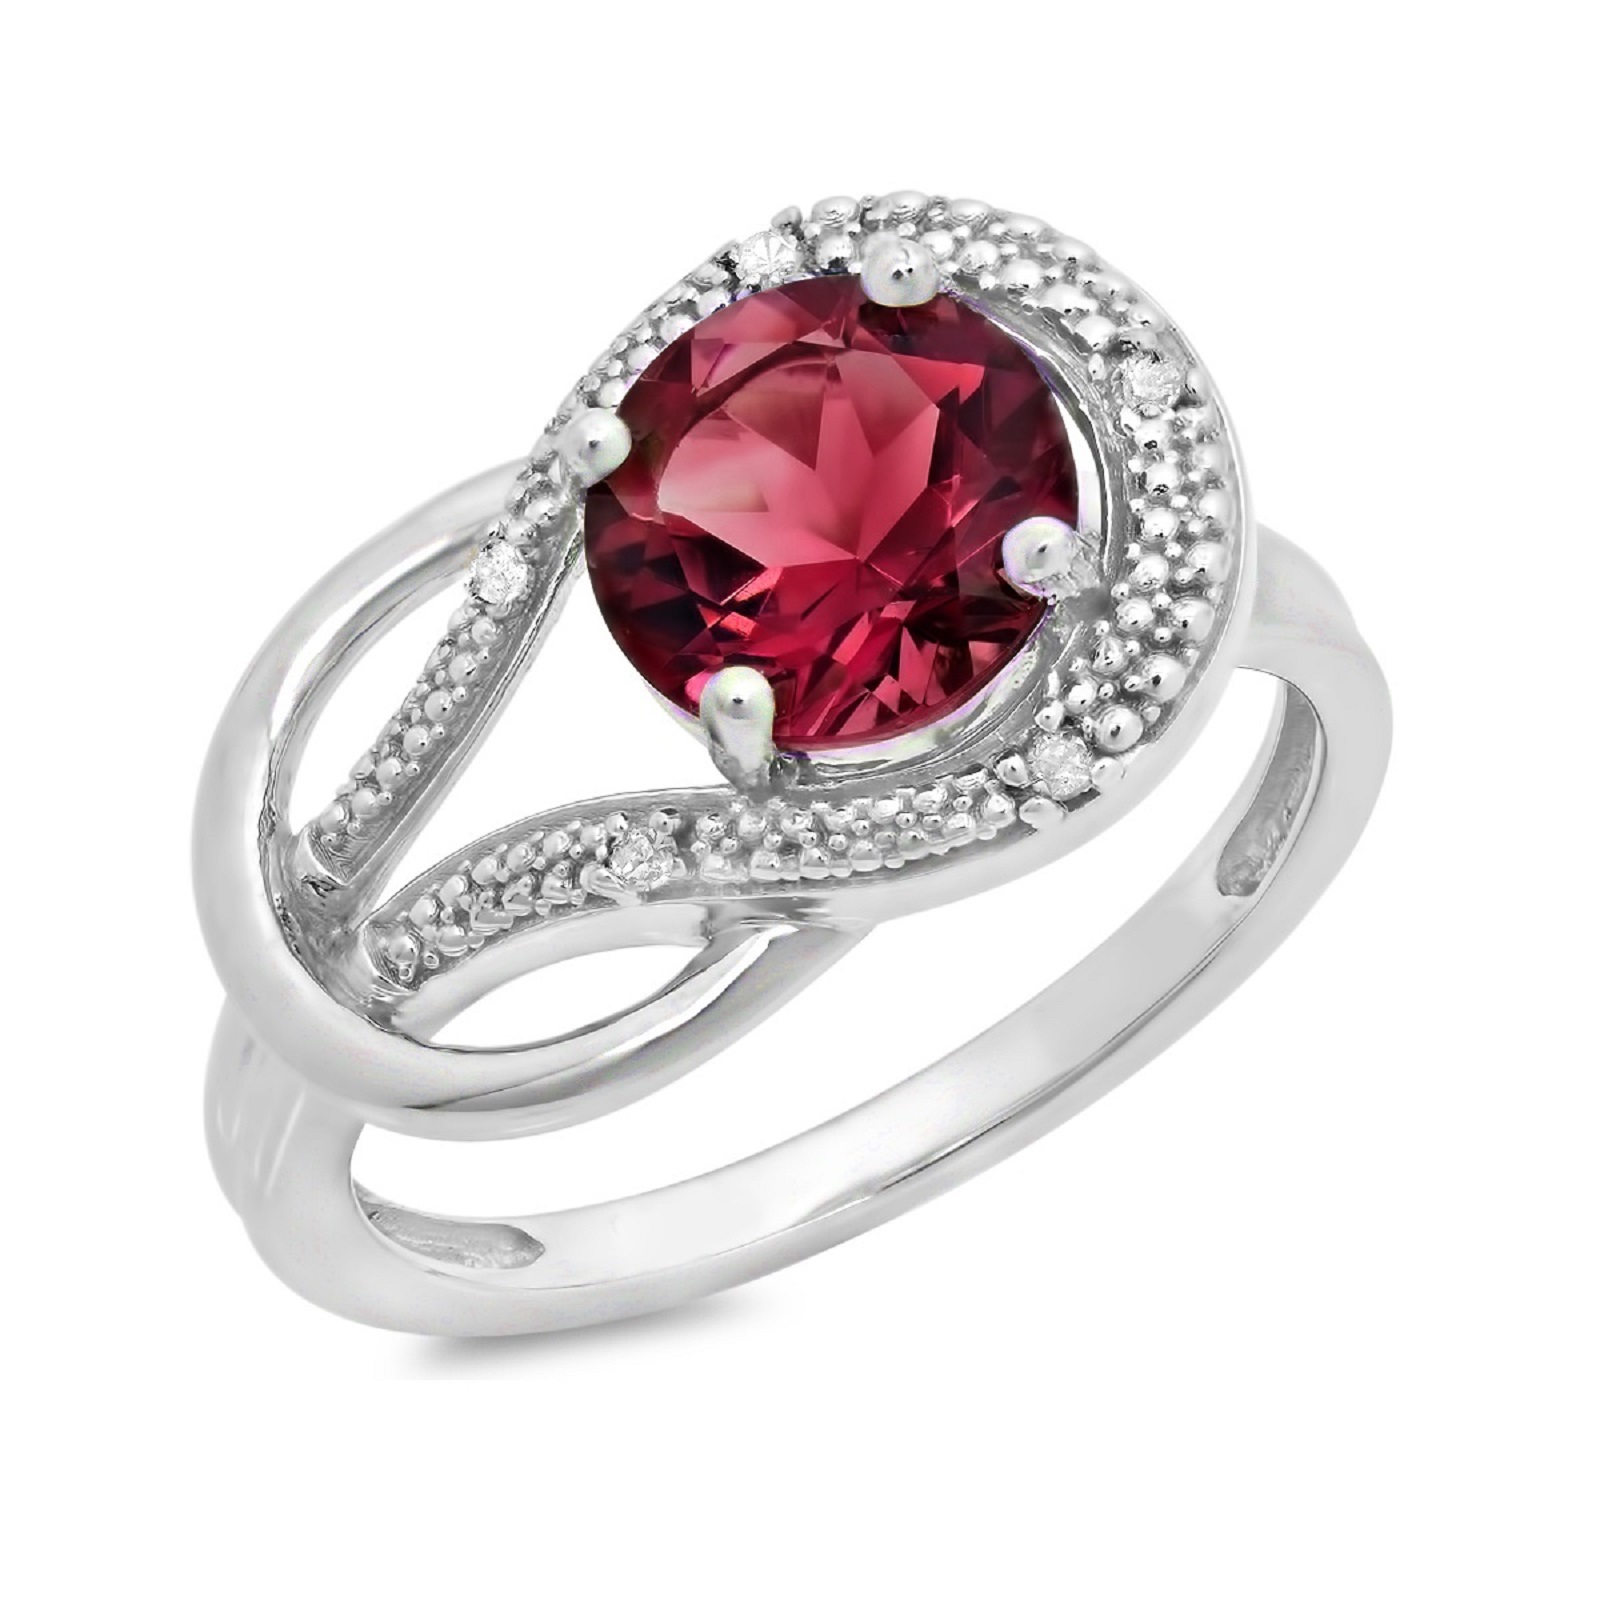 10KT White Gold 8mm Round Garnet and Diamond Accent Love Knot Ring (0.03 cttw, Size 8)